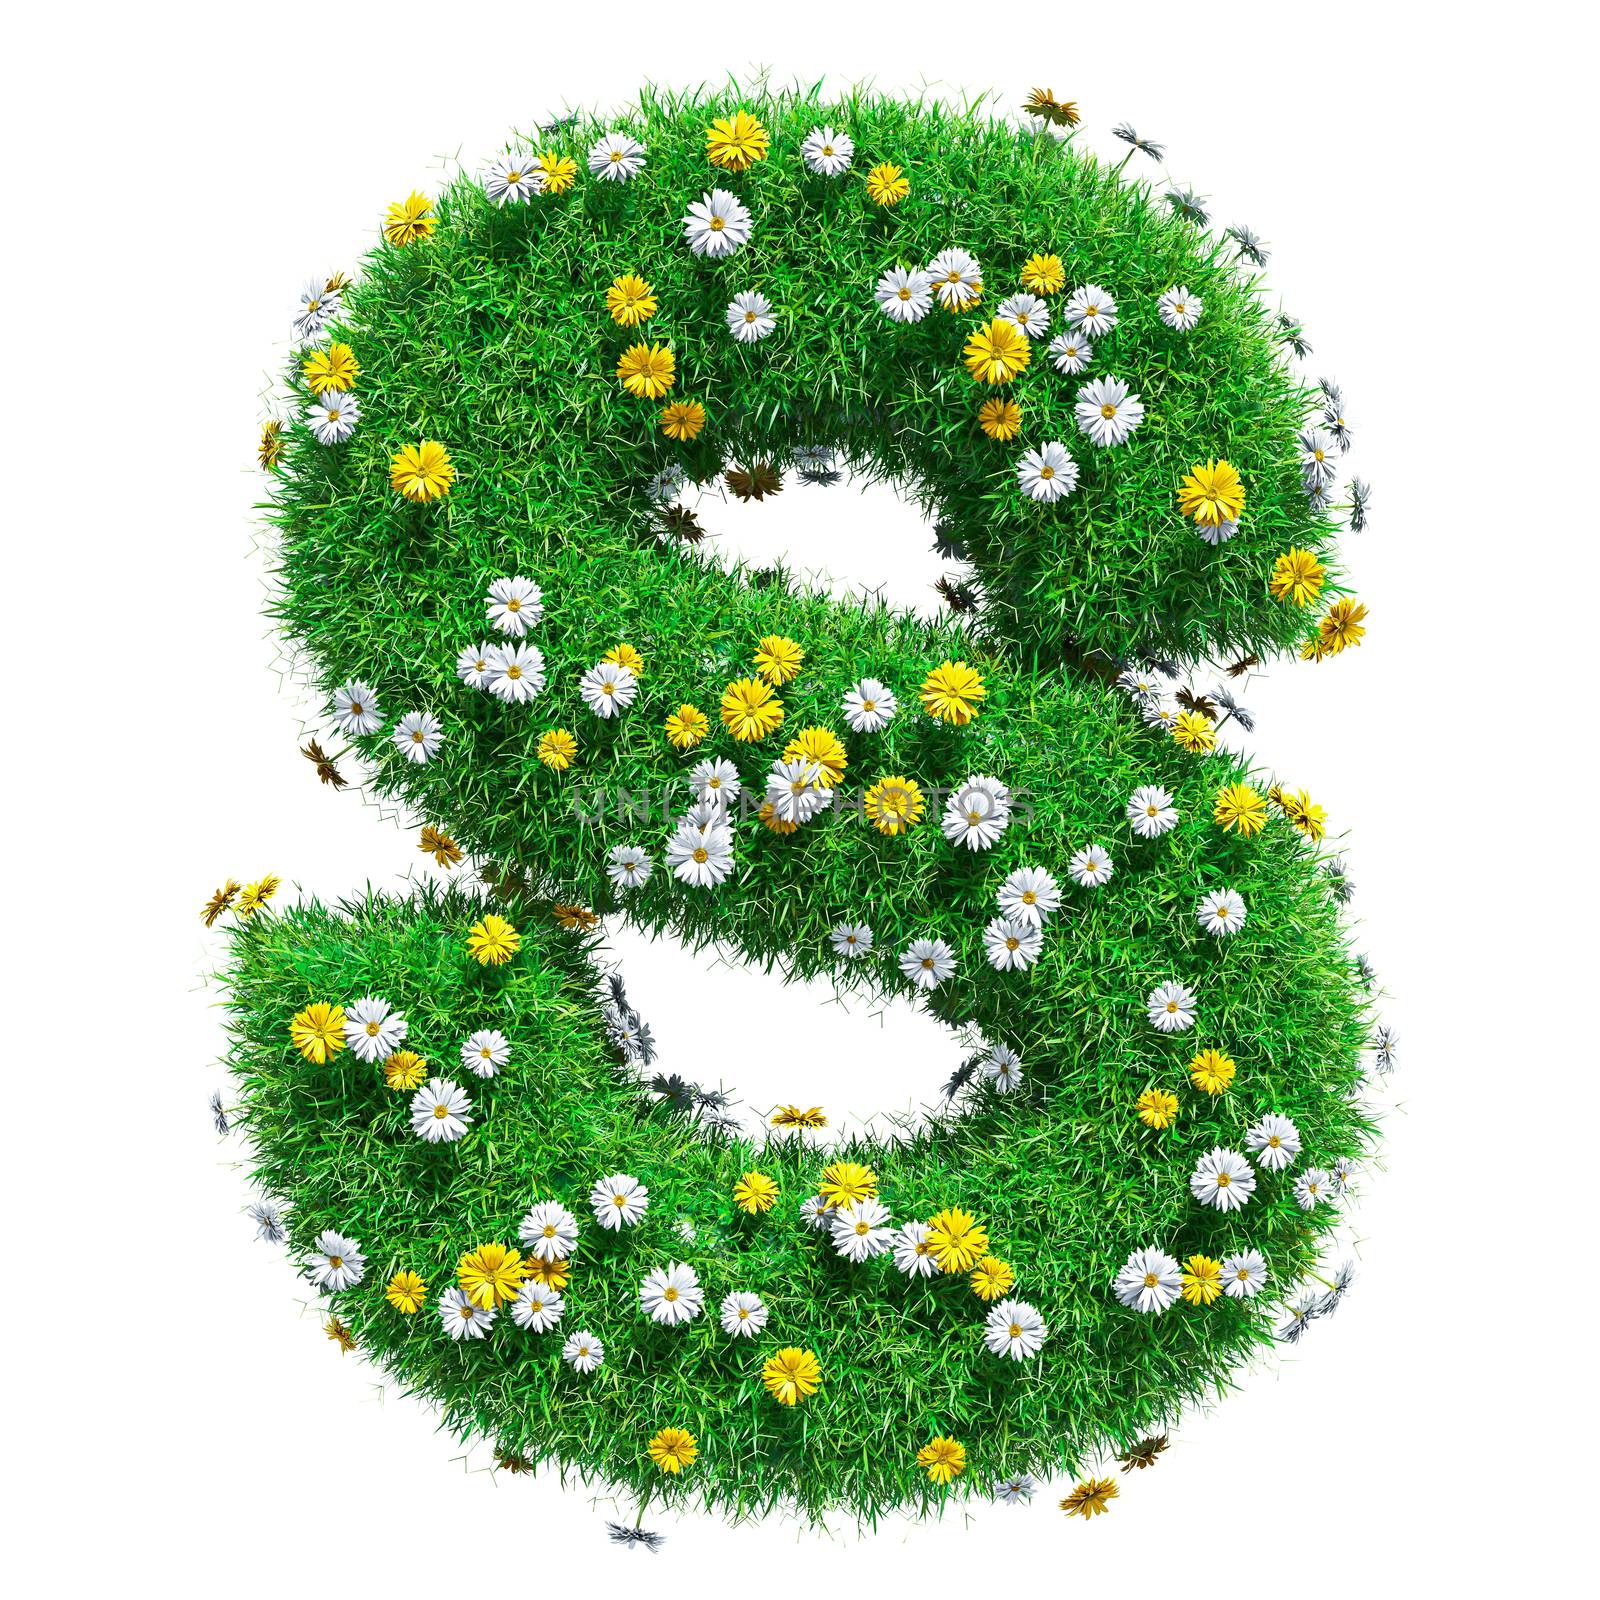 Letter S Of Green Grass And Flowers by cherezoff